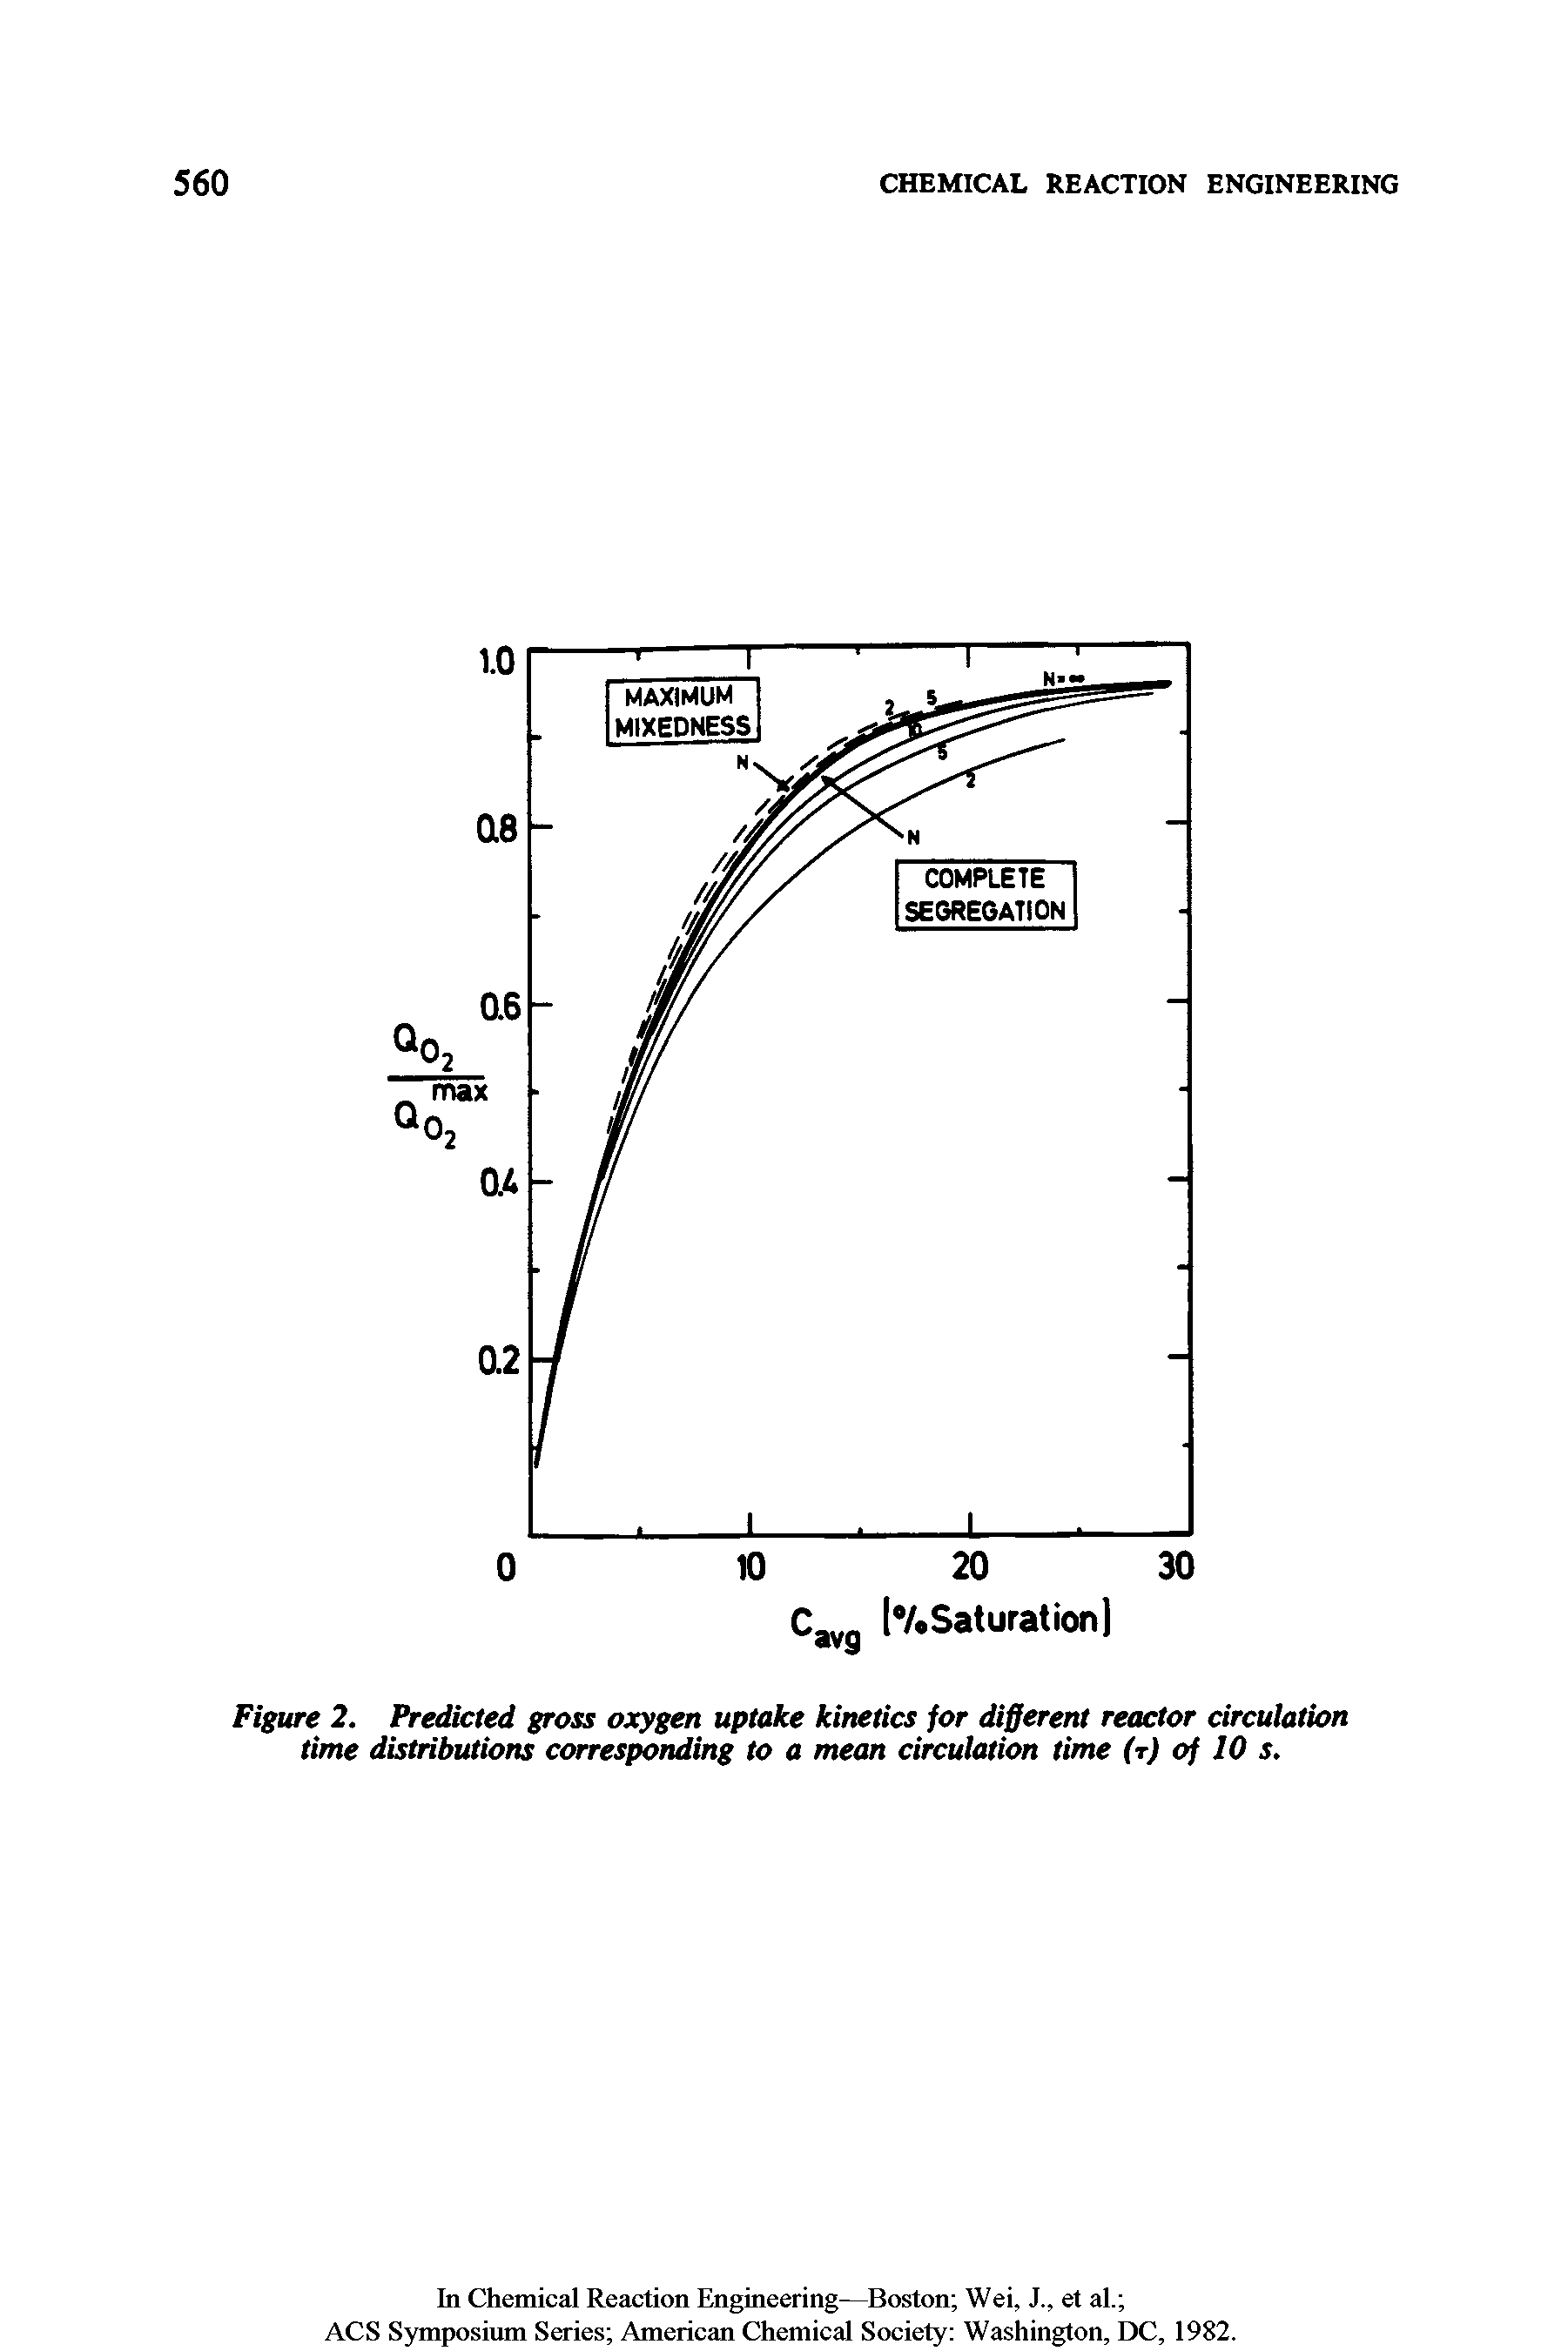 Figure 2. Predicted gross oxygen uptake kinetics for different reactor circulation time distributions corresponding to a mean circulation time (t) of 10 s.